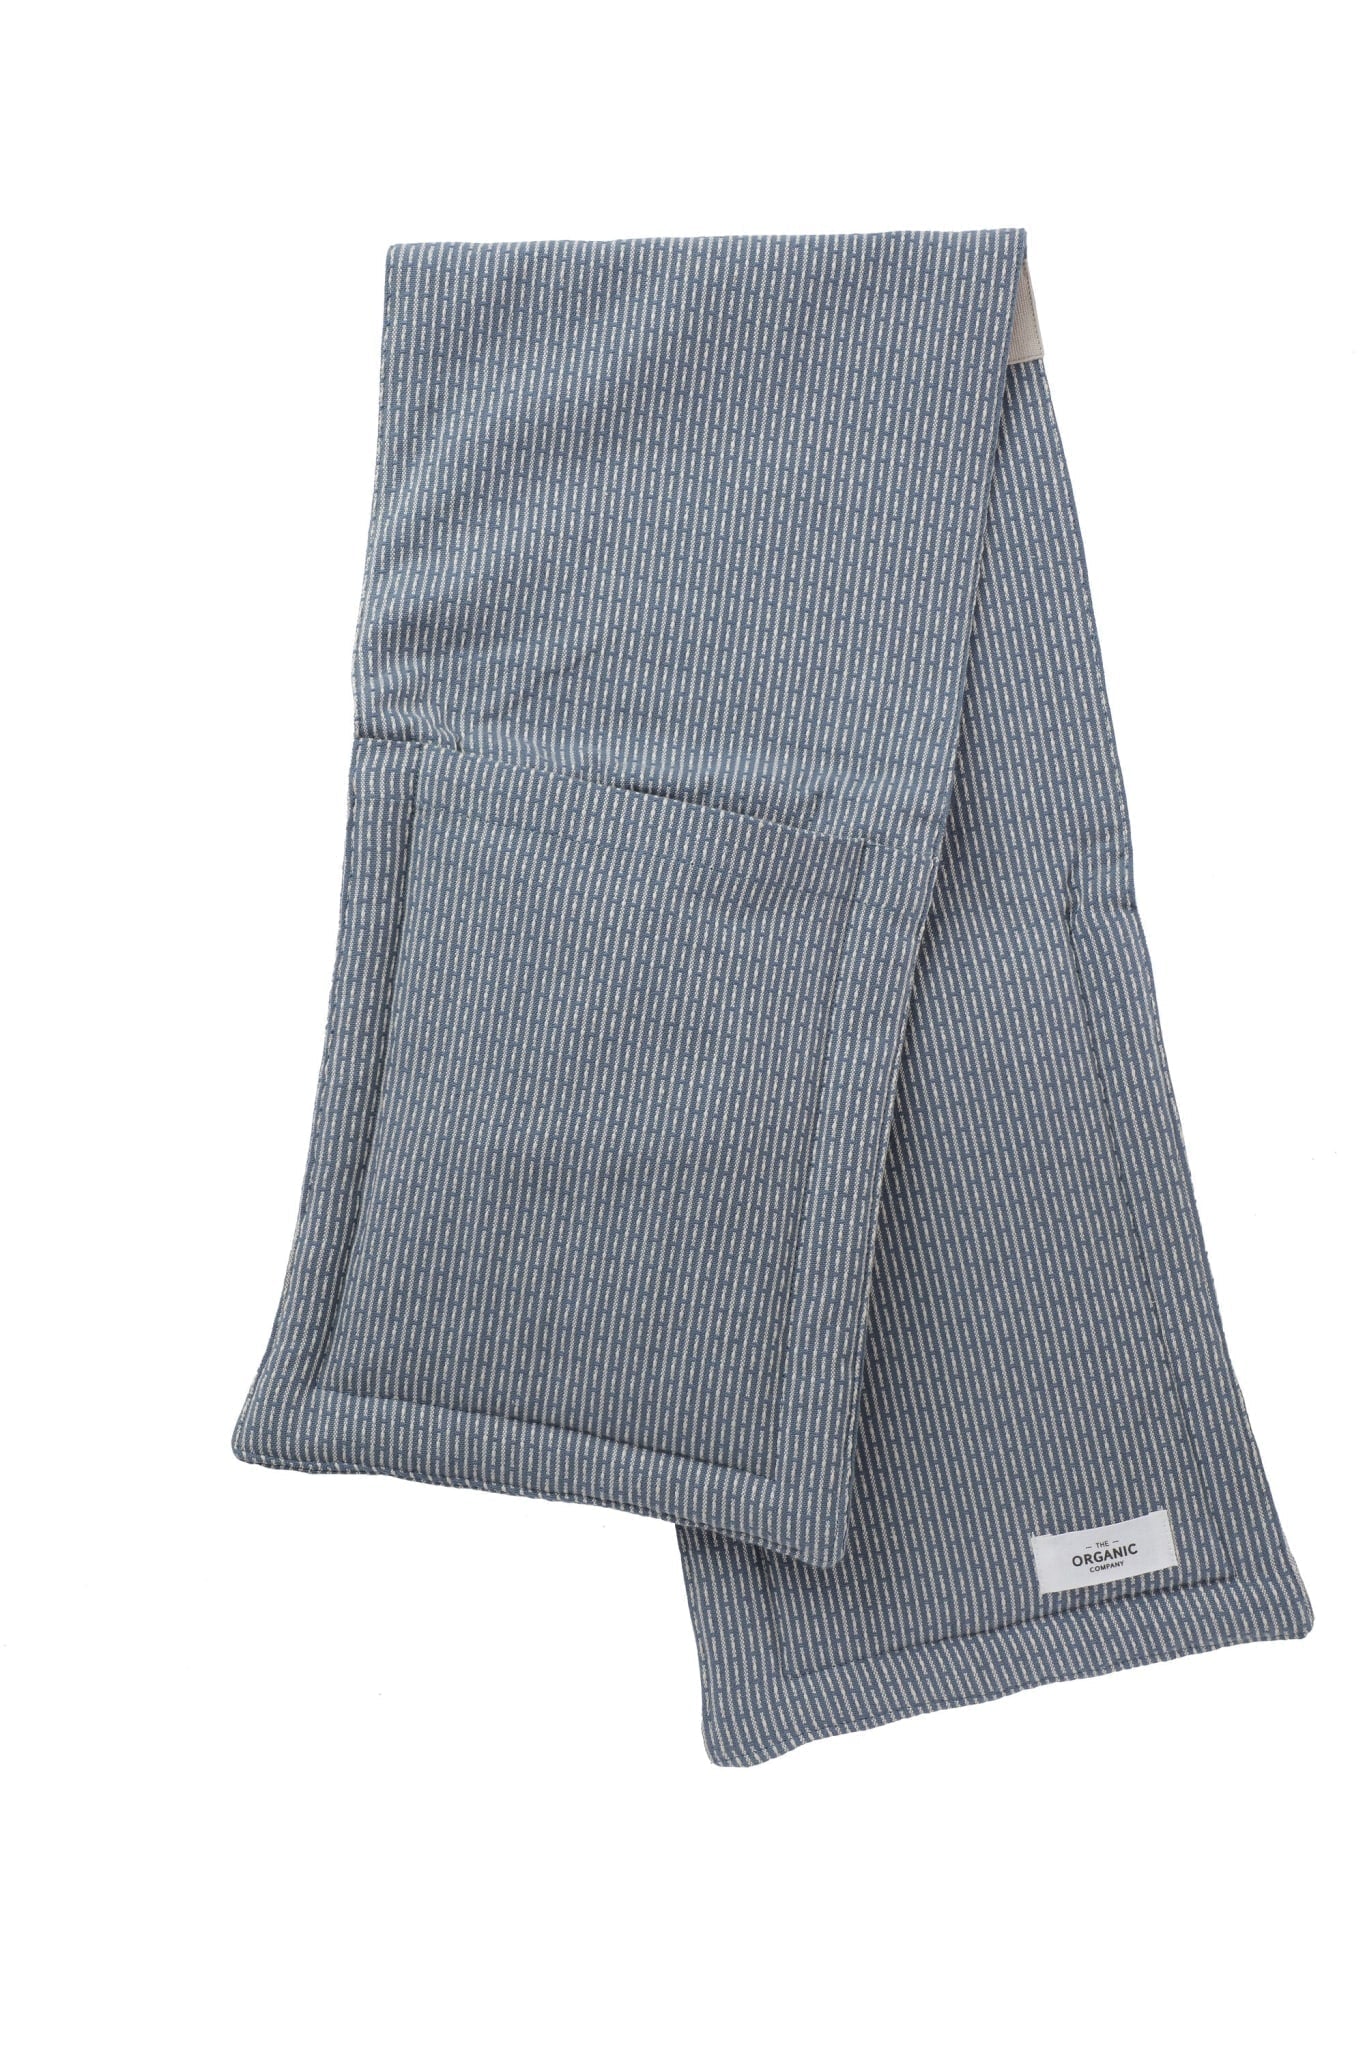 The Organic Company Oven Gloves, Grey Blue Stone